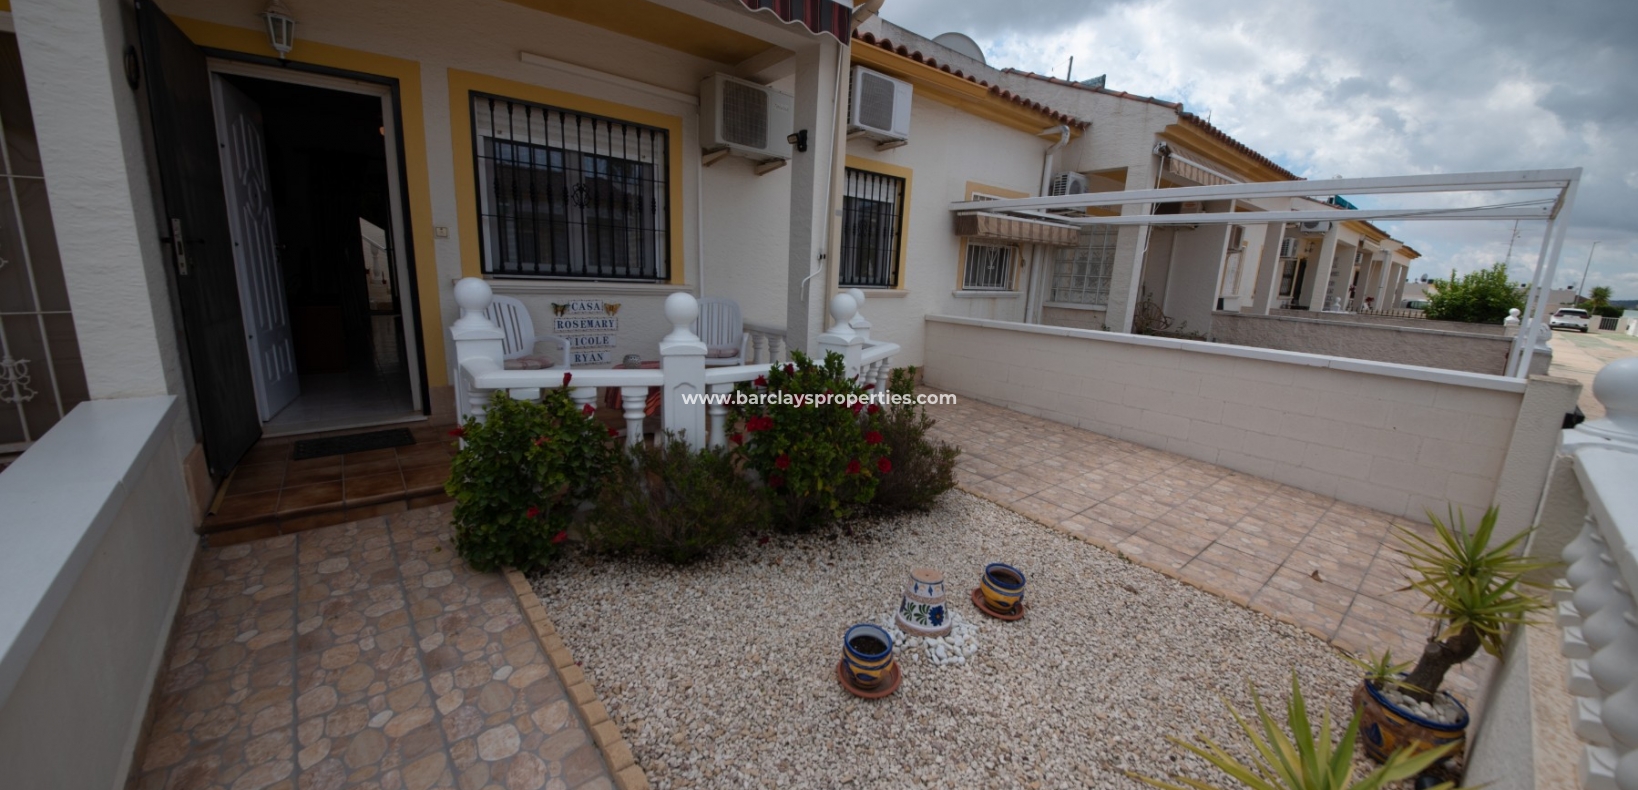 Property with communal pool for sale in La Marina